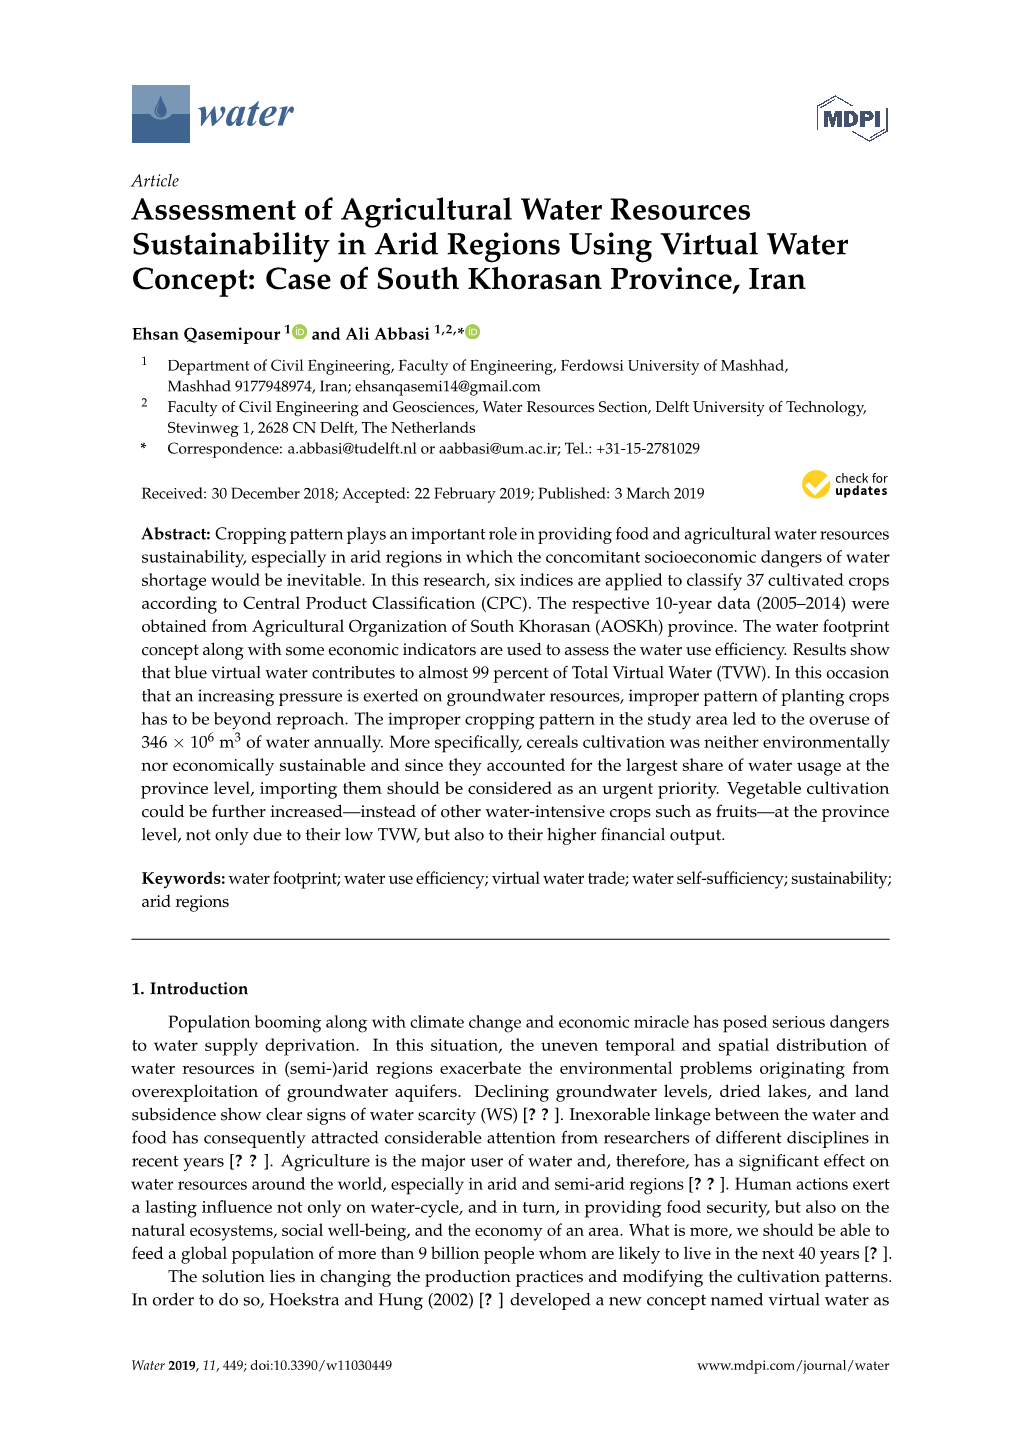 Assessment of Agricultural Water Resources Sustainability in Arid Regions Using Virtual Water Concept: Case of South Khorasan Province, Iran